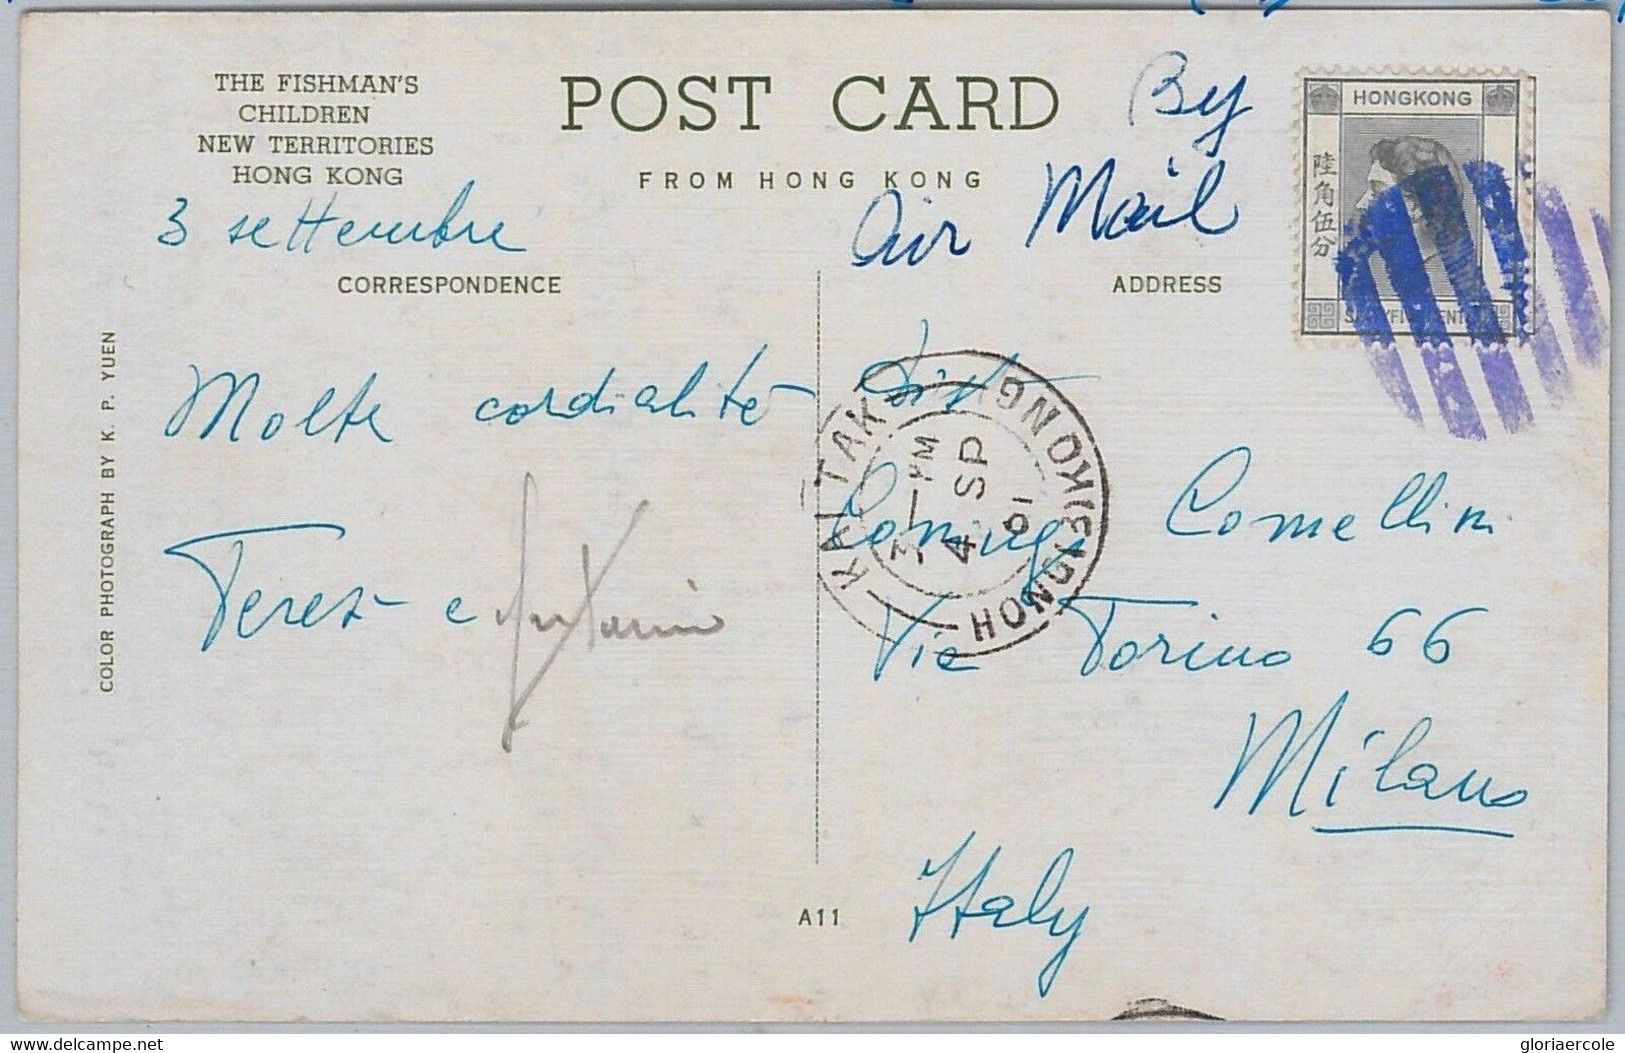 39730 HONG KONG - POSTAL HISTORY - POSTCARD From KAITAK - MUTE Cancellation 1961 - Covers & Documents